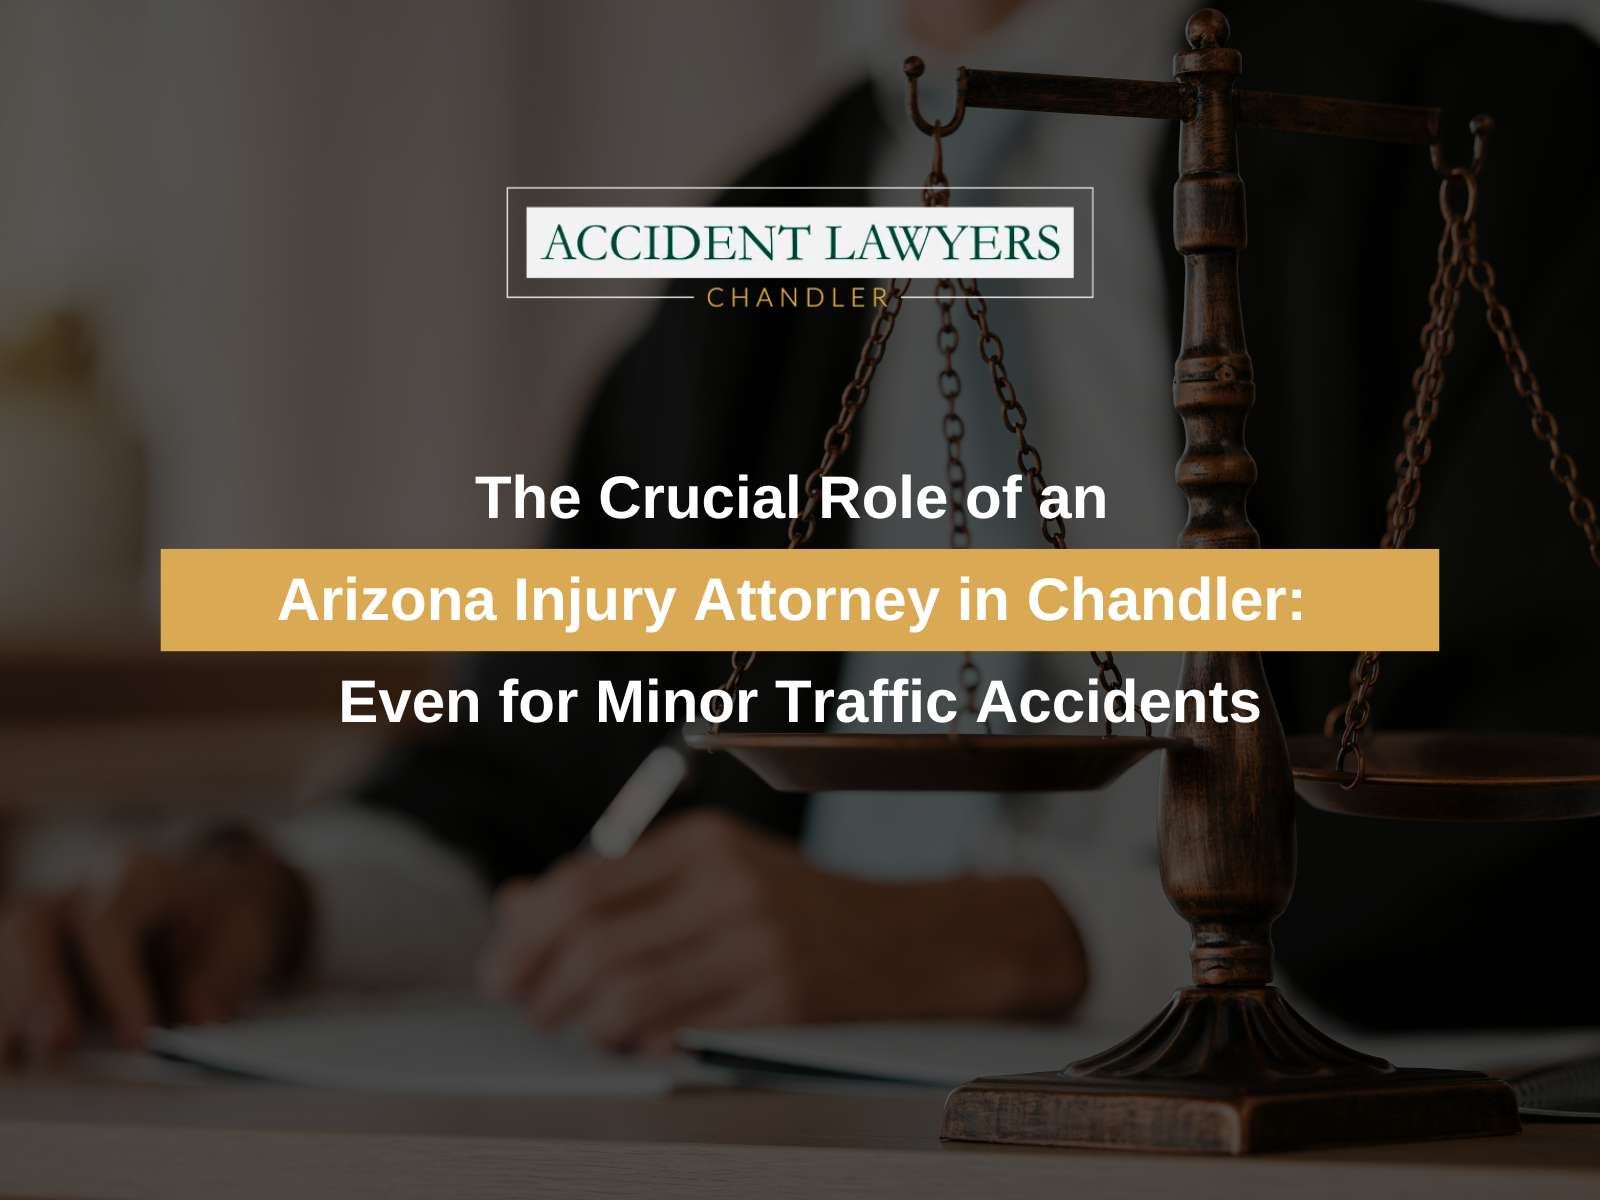 The Crucial Role of an Arizona Injury Attorney in Chandler: Even for Minor Traffic Accidents